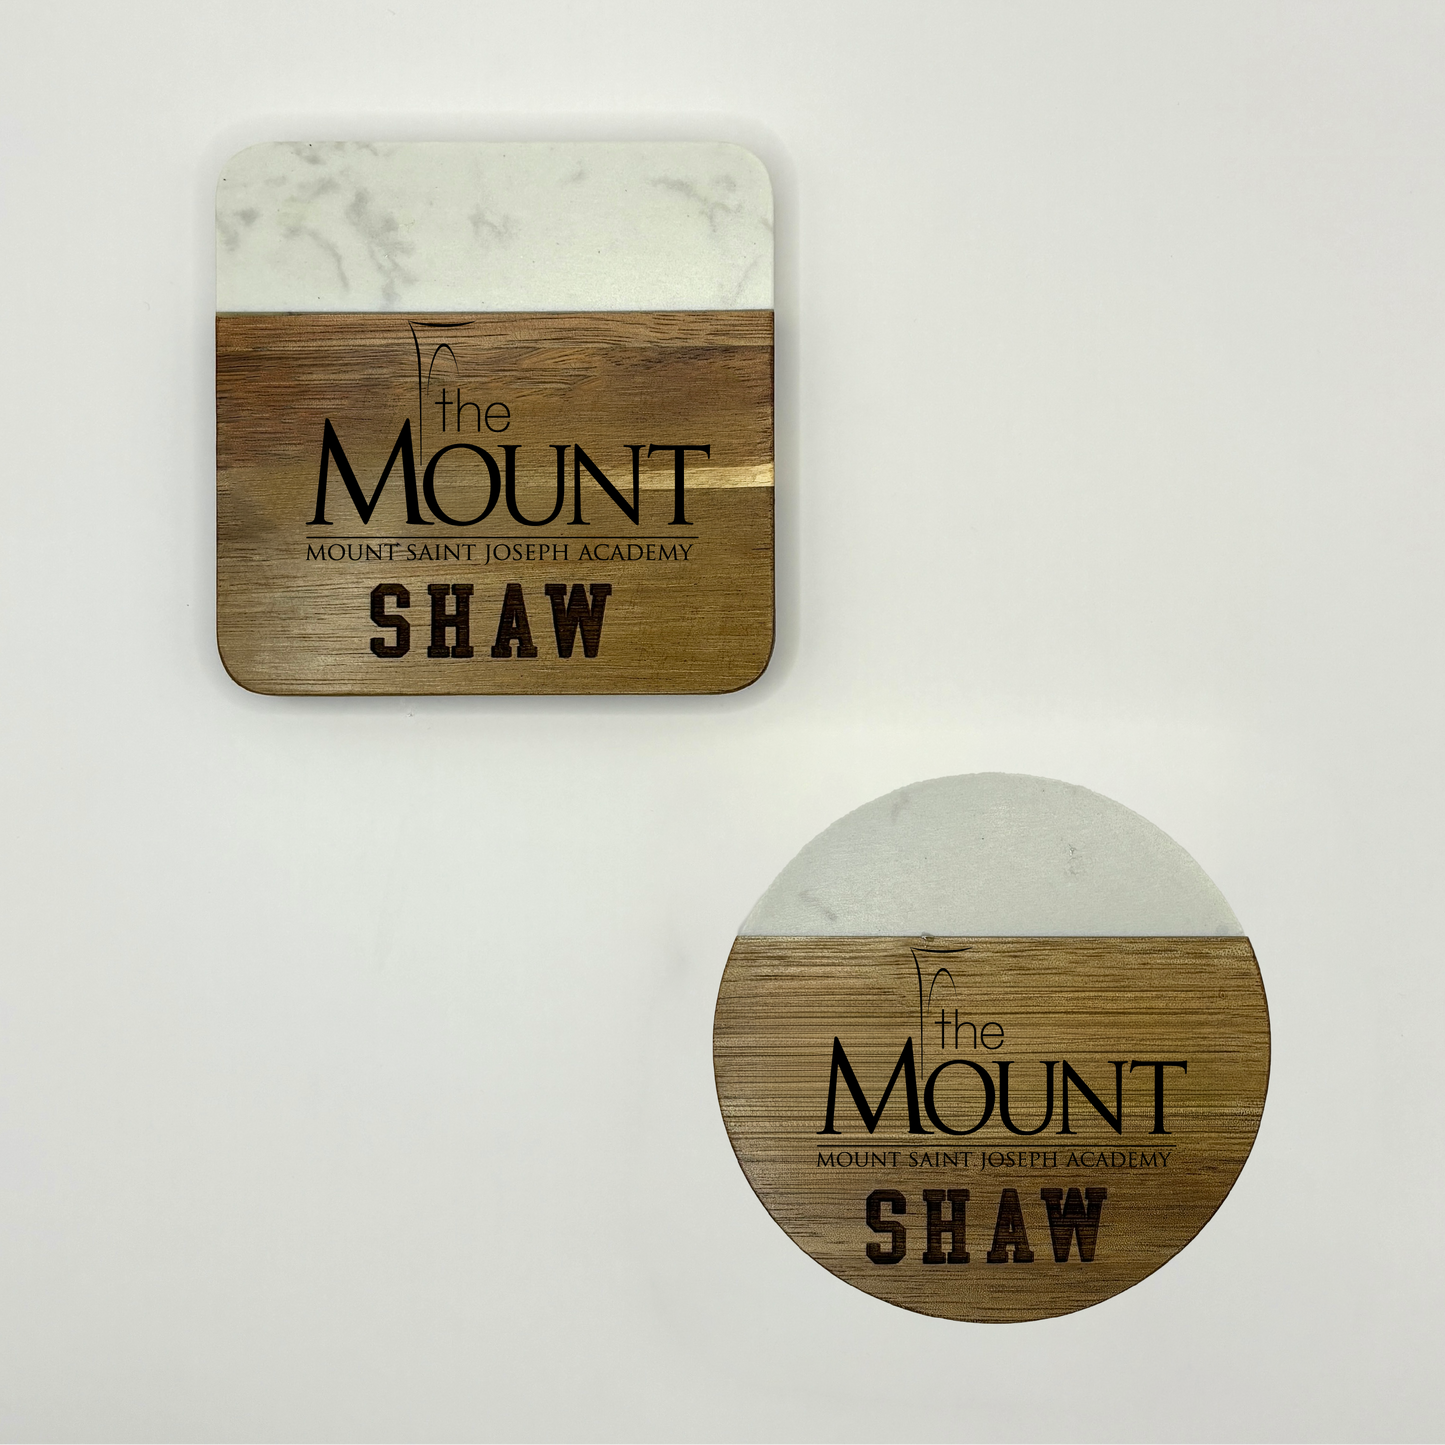 Customized Square Marble/Wooden Coasters (Set of 4)